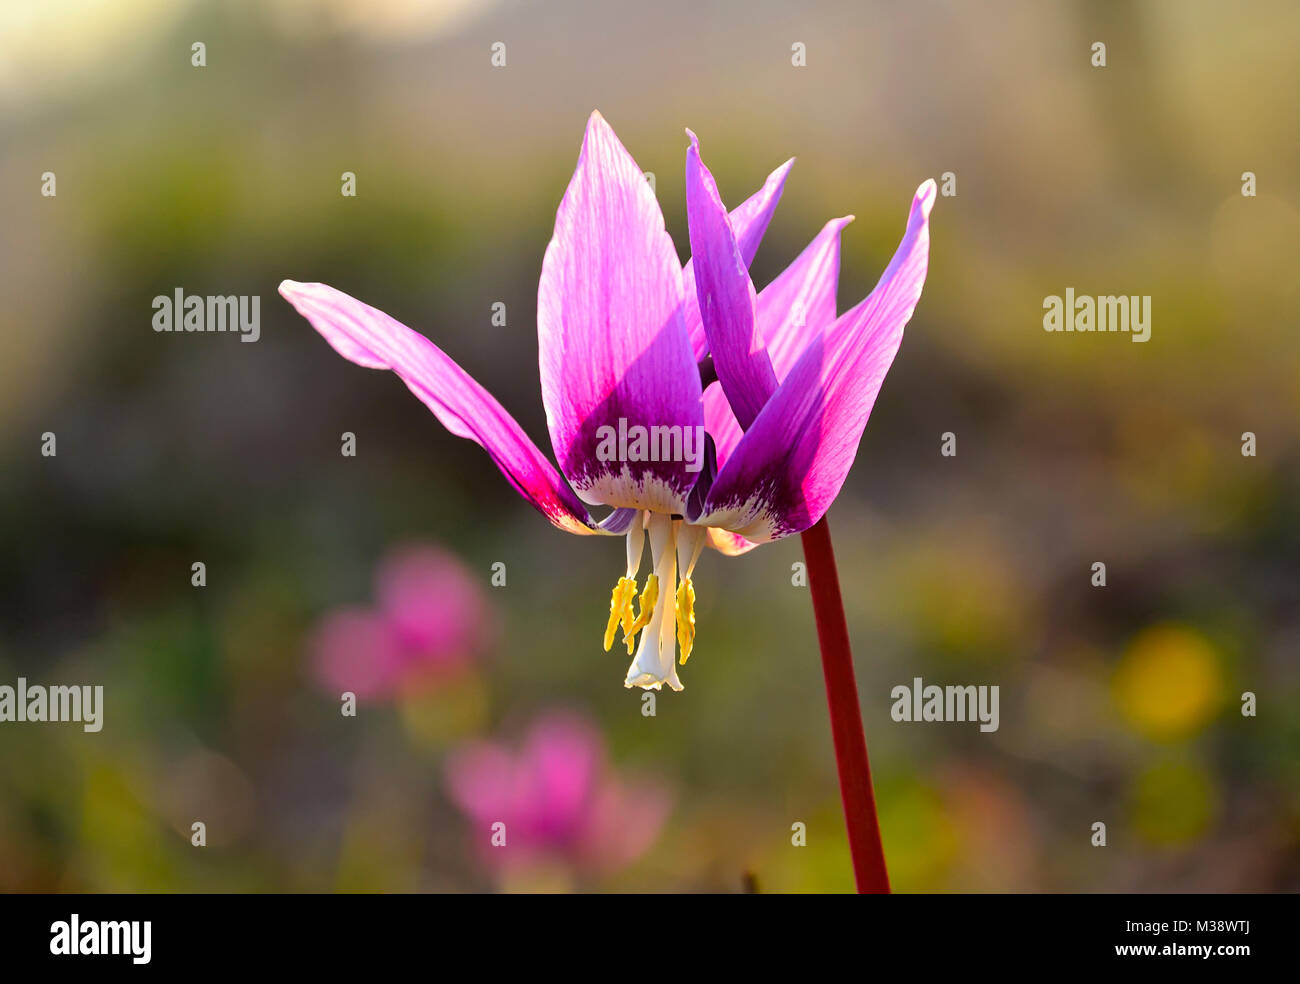 Early spring violet flower Erythronium Sibiricum in sunlight close up Stock Photo